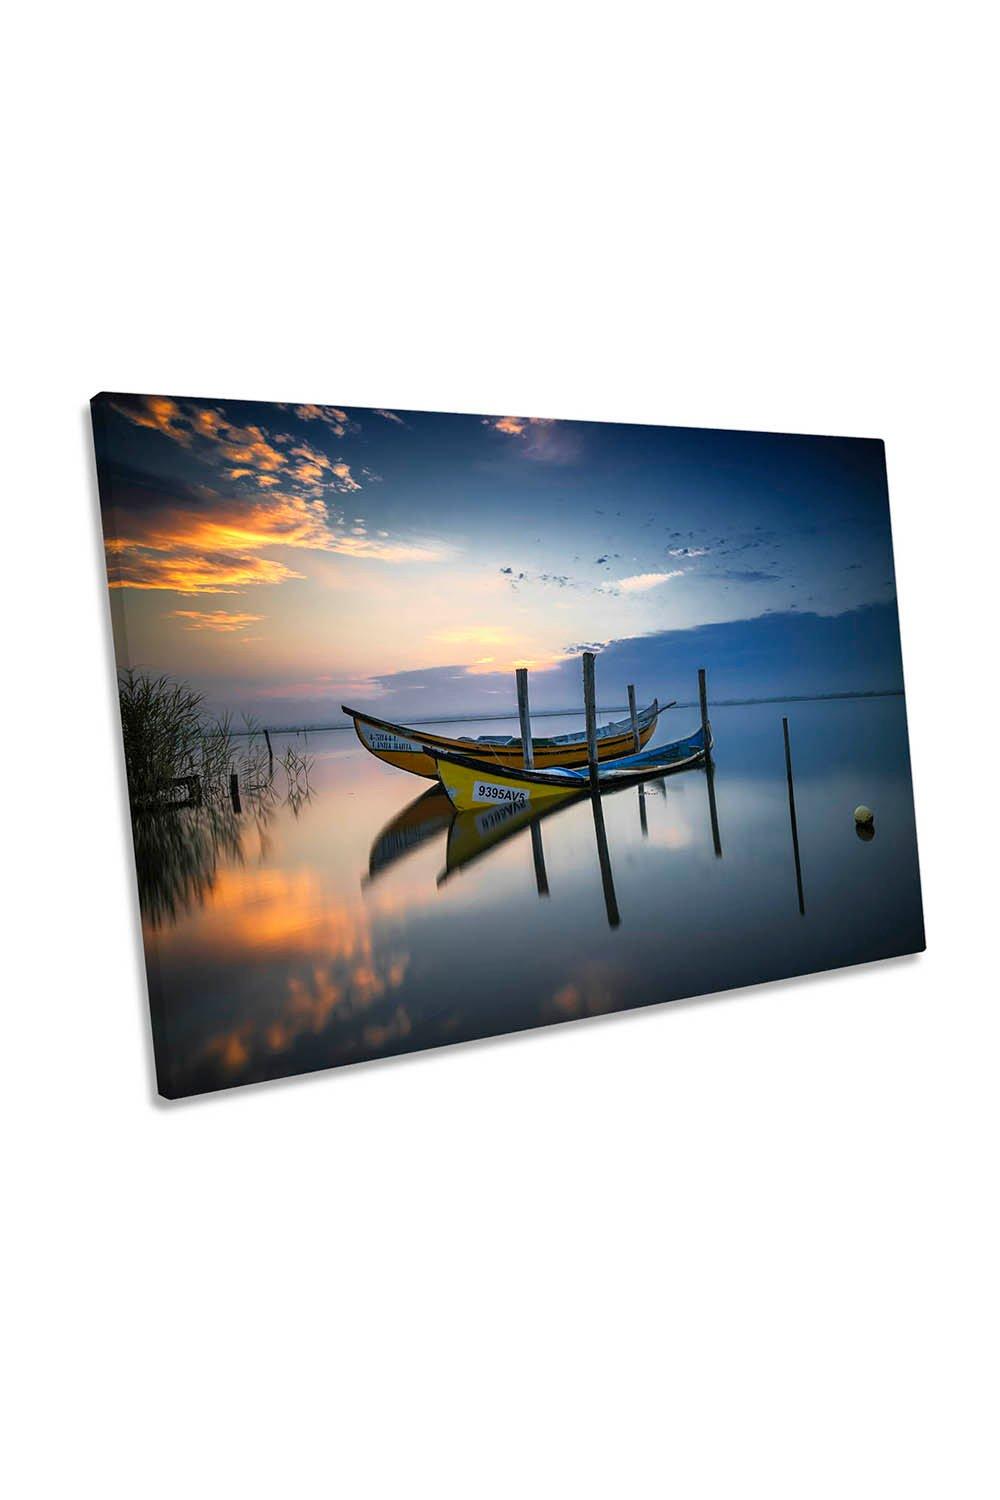 The Boats Calm Lake Reflection Canvas Wall Art Picture Print